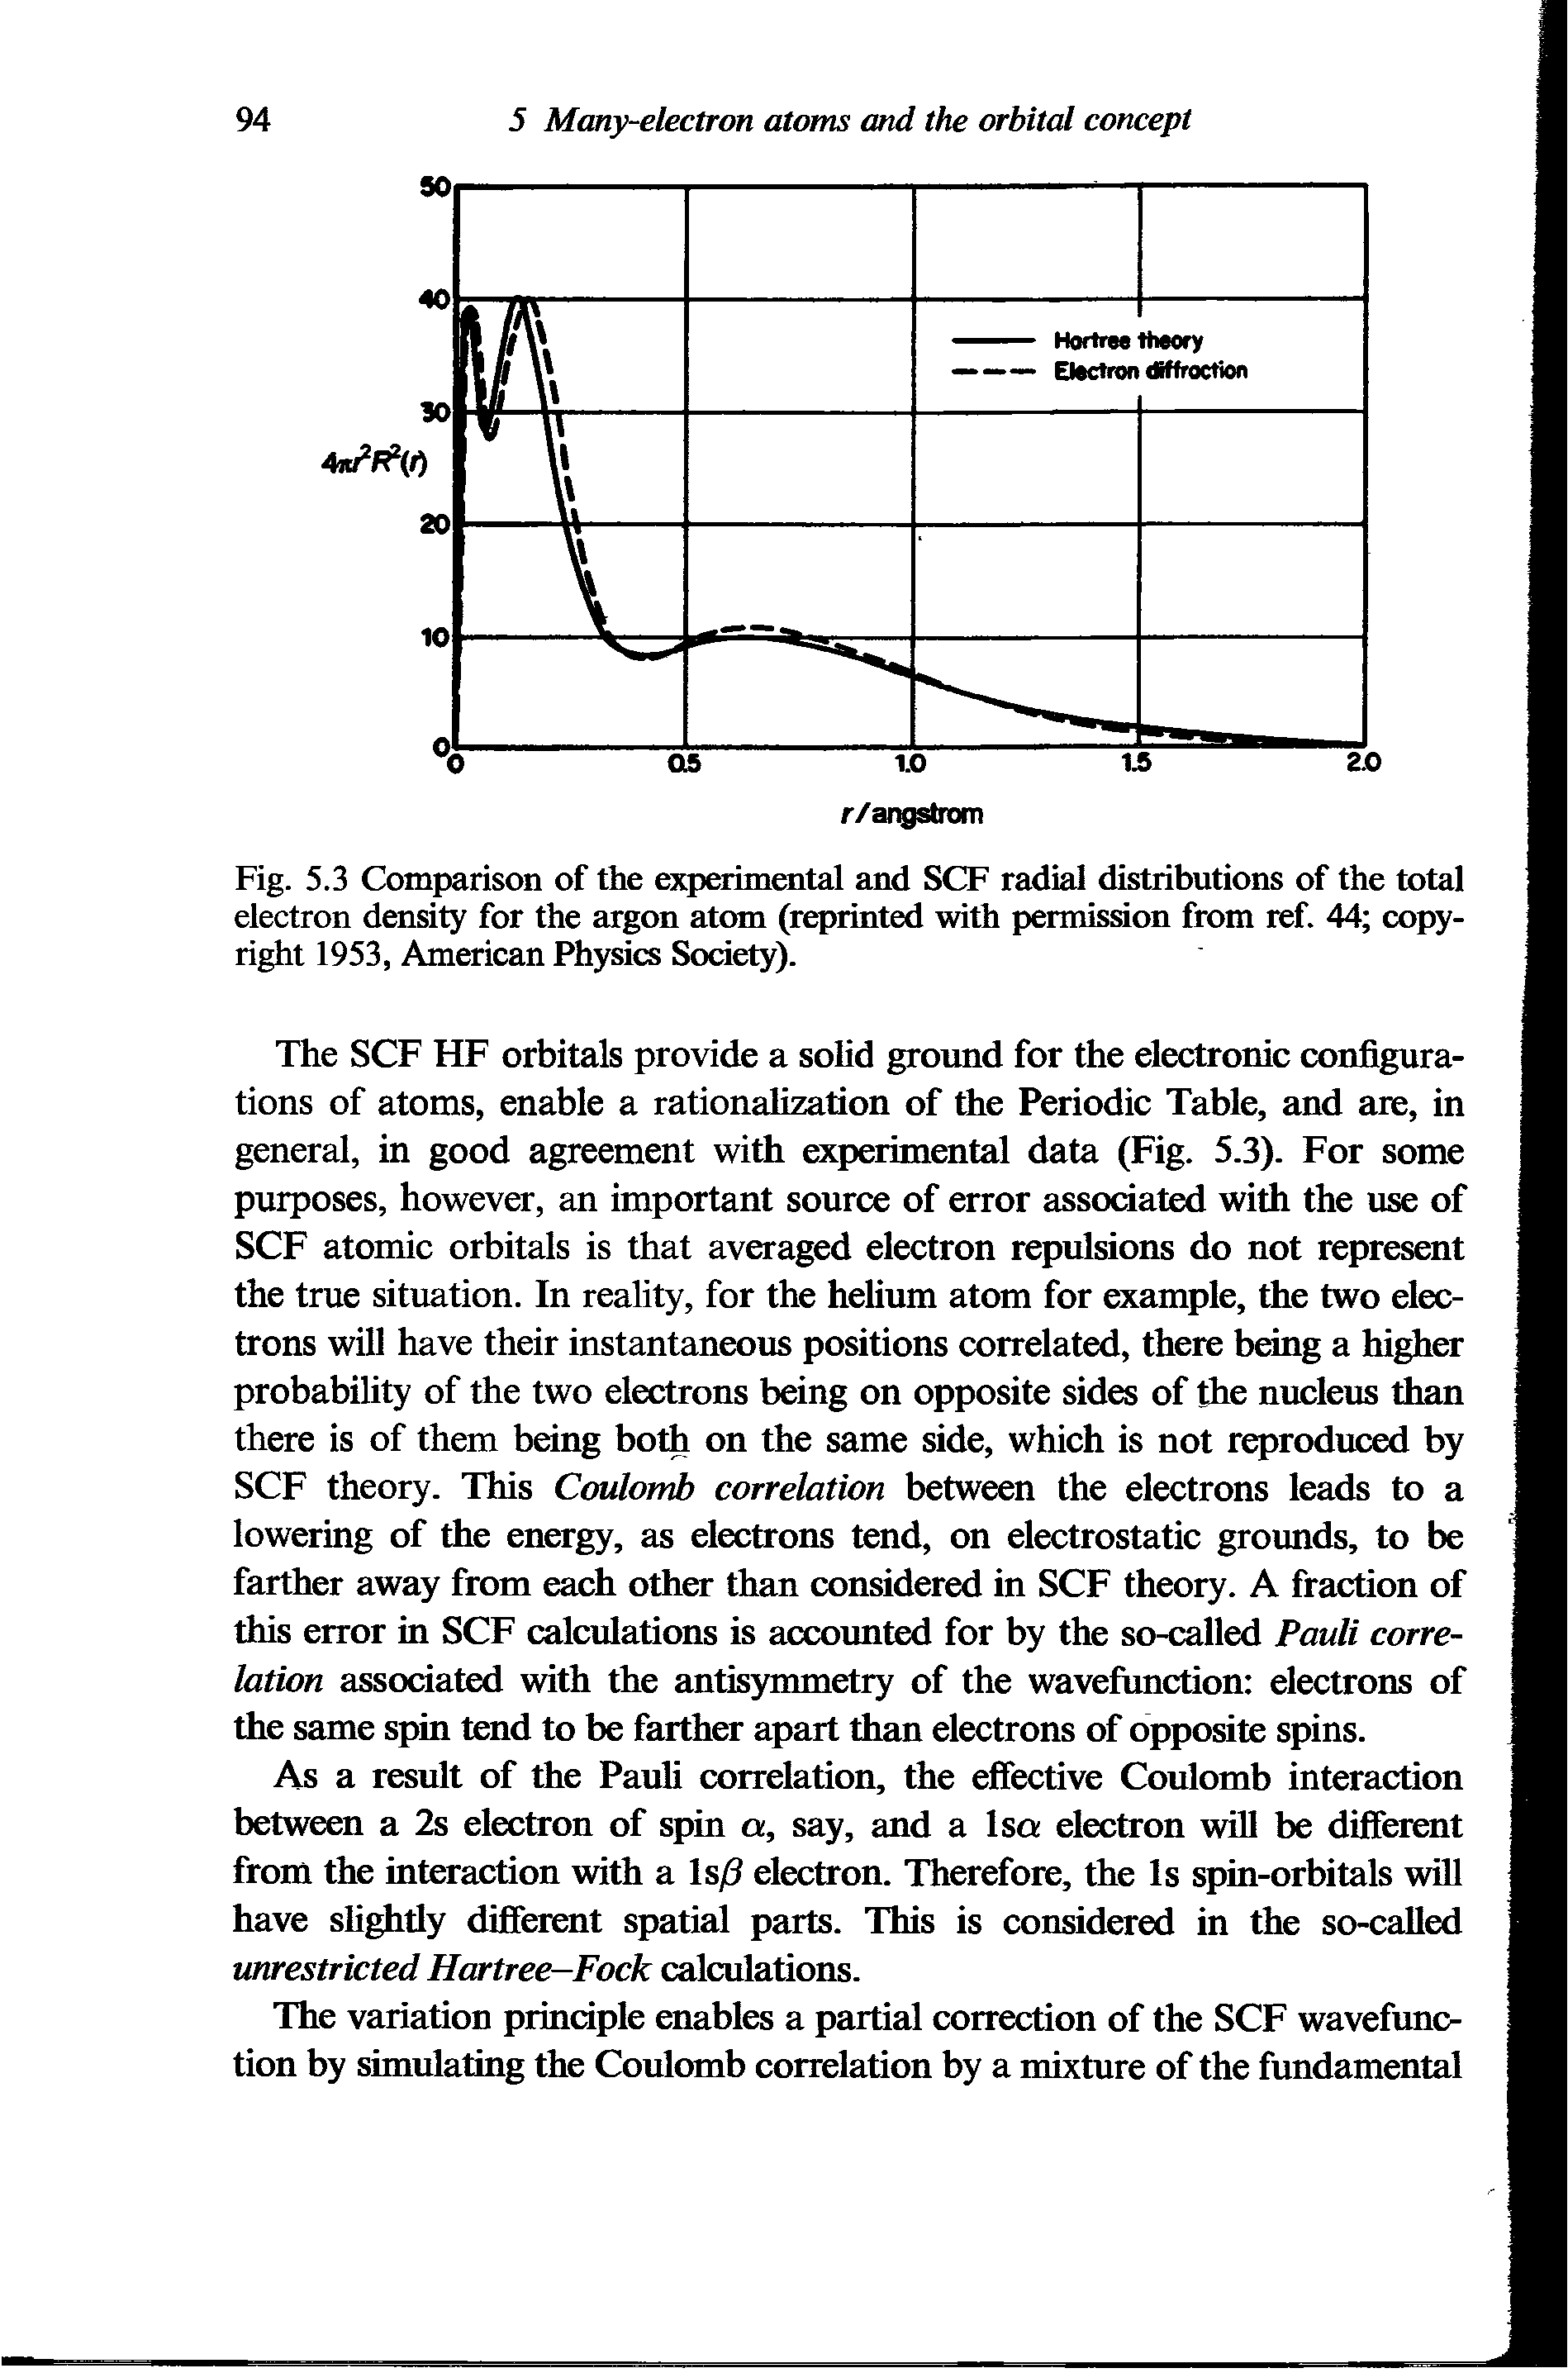 Fig. 5.3 Comparison of the experimental and SCF radial distributions of the total electron density for the argon atom (reprinted with permission from lef. 44 copyright 1953, American Physics Society).